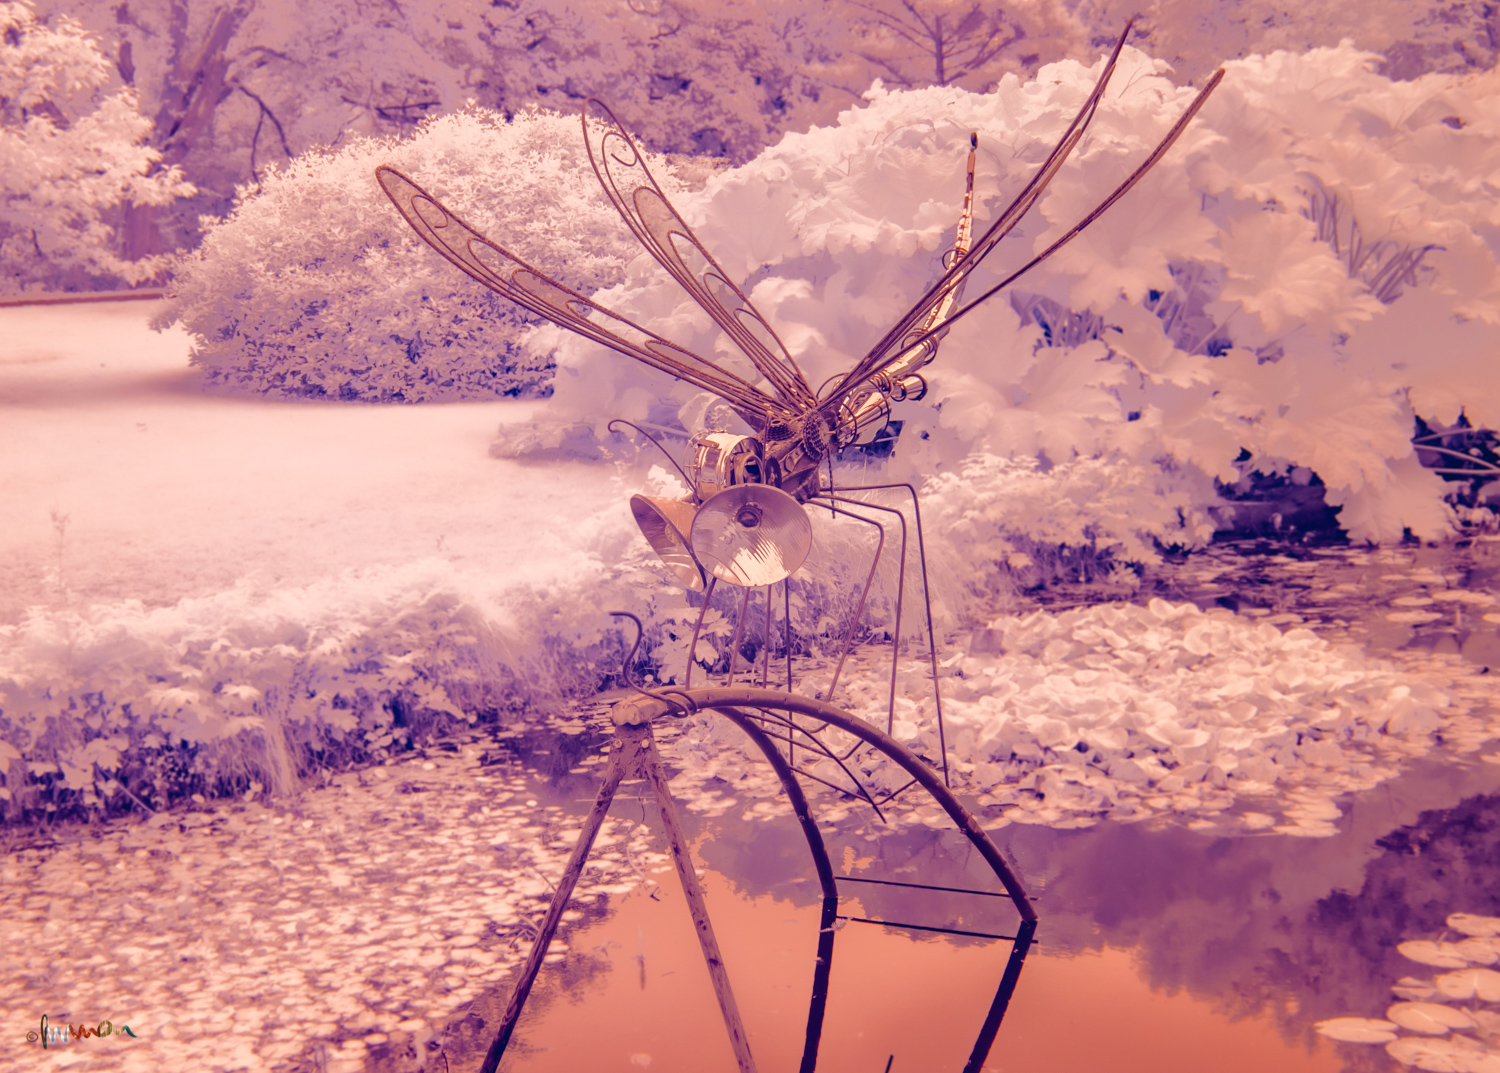 ‘Dragonfly’ by Frank Hallinan Flood, Botanic Gardens, Art in Context, 2021. I chose to shoot in infrared, summing three different exposures. I rendered it with several Lightroom adjustments. The dragonfly has long since departed.